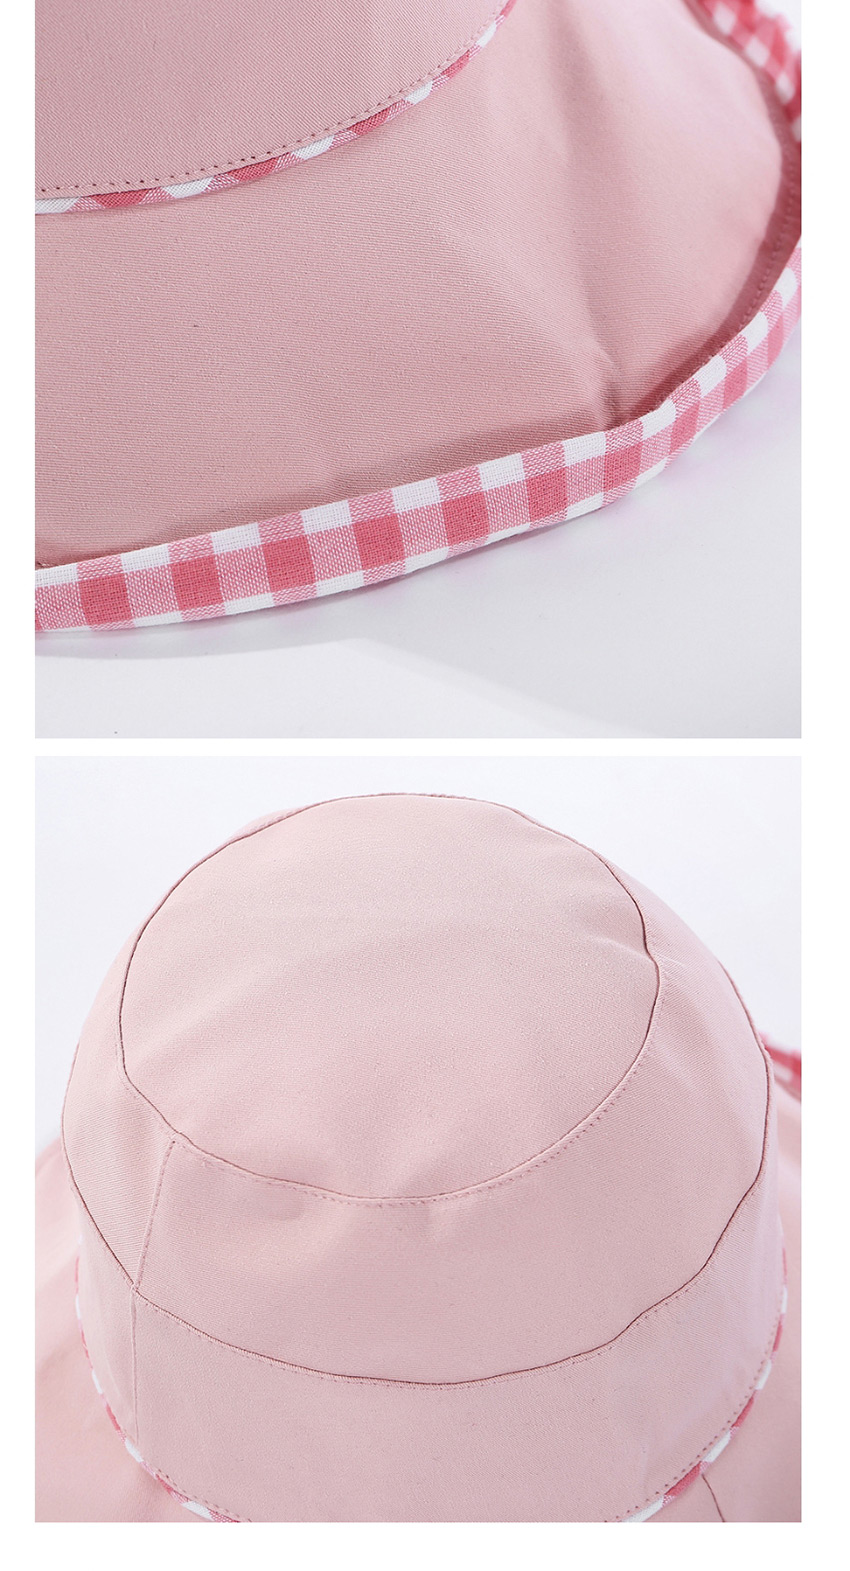 Fashion Pink Checked Double-sided Fisherman Hat,Sun Hats